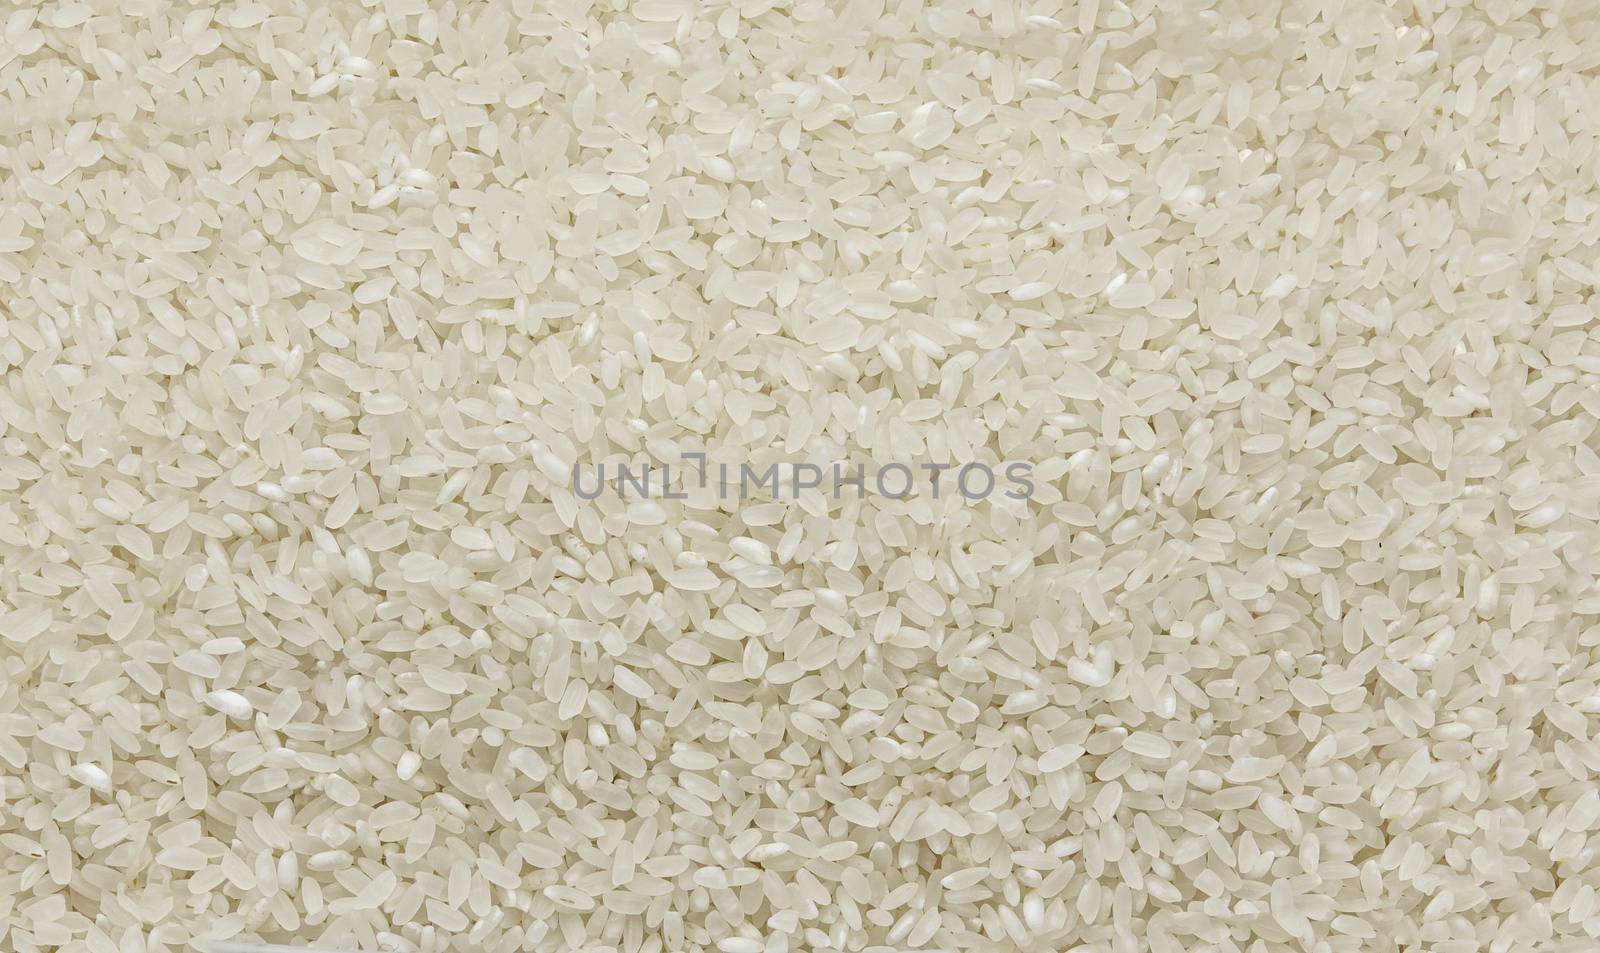 White polished rice grain - texture and details - traditional food by Studia72